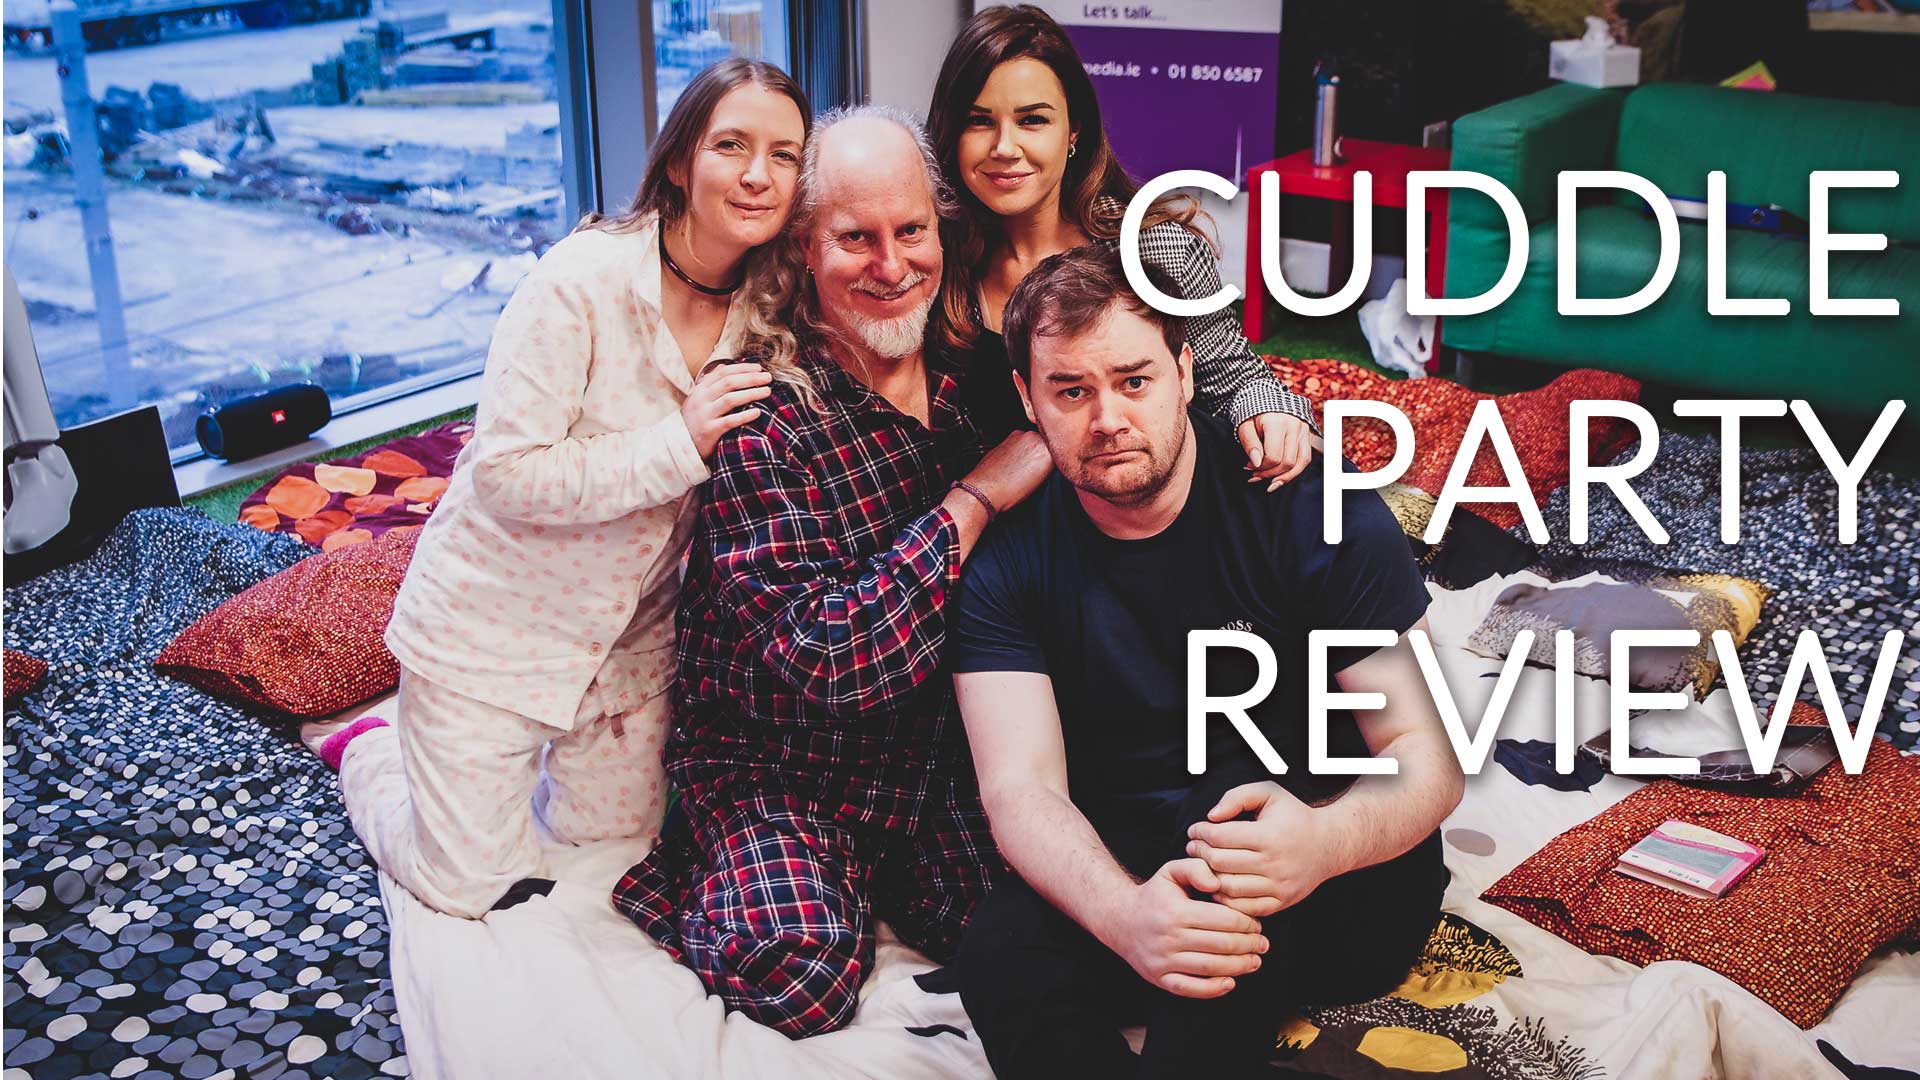 Cuddle Party Ireland Review